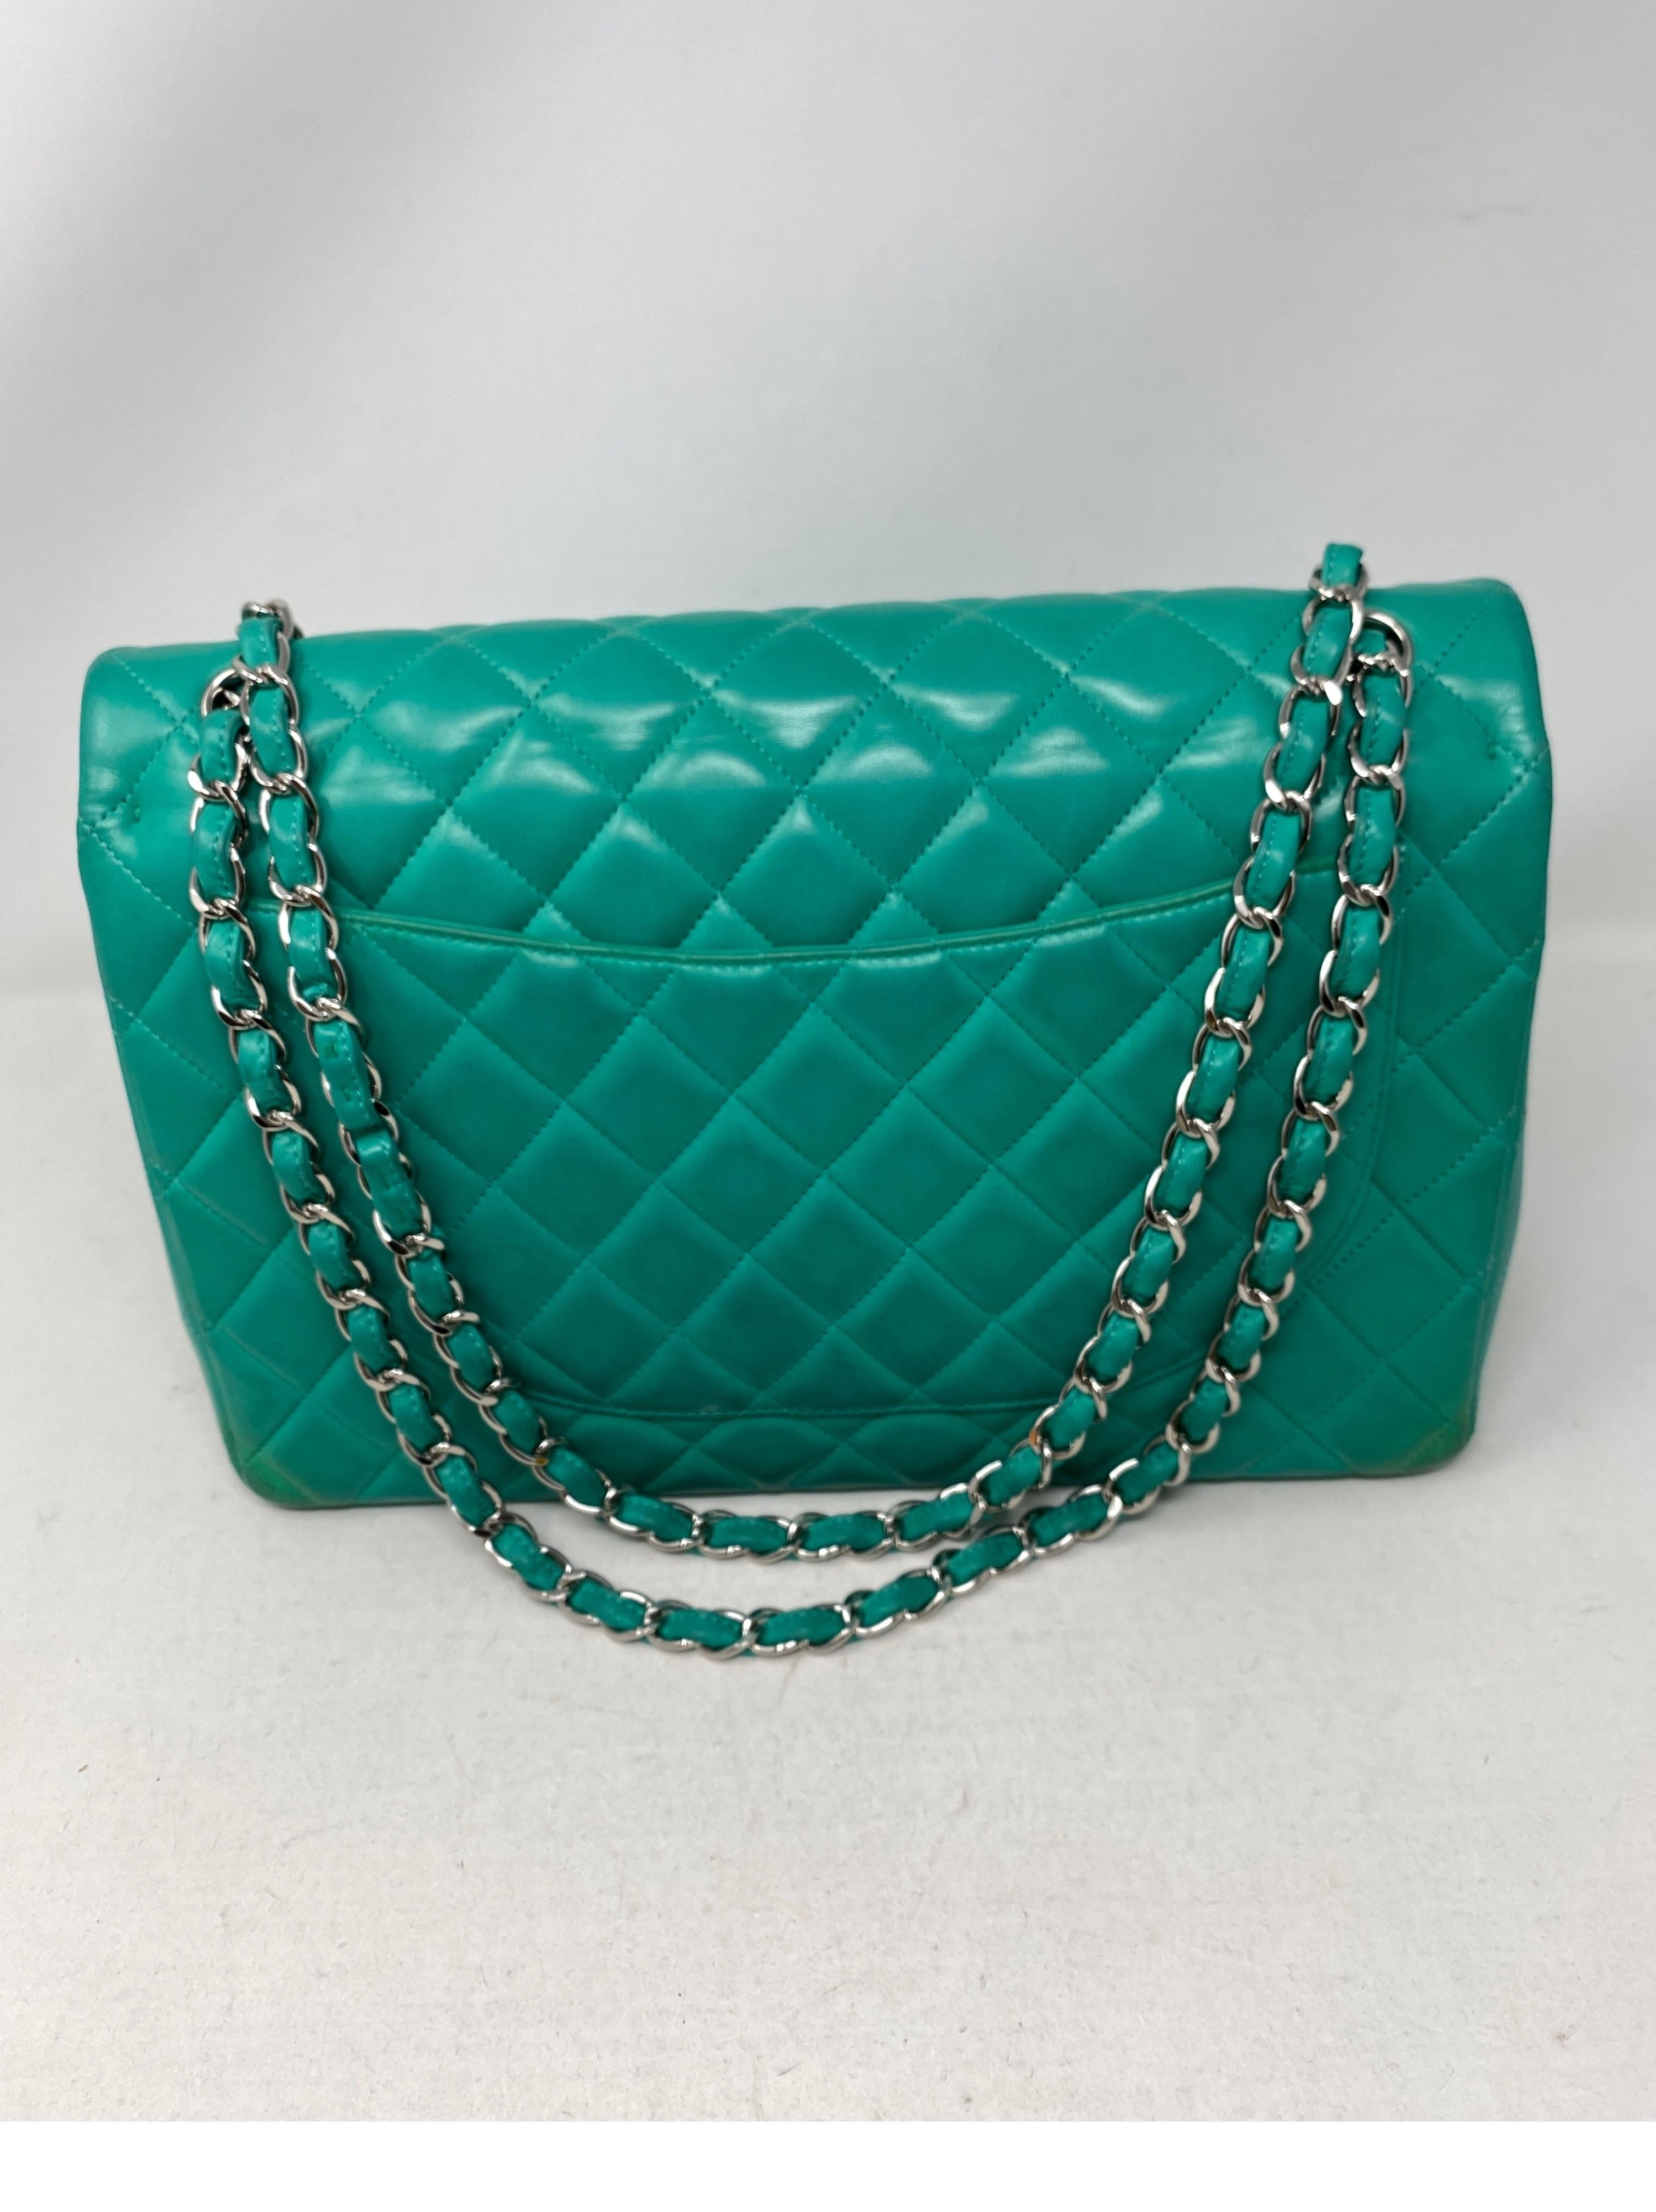 Chanel Teal Maxi Double Flap Bag 3